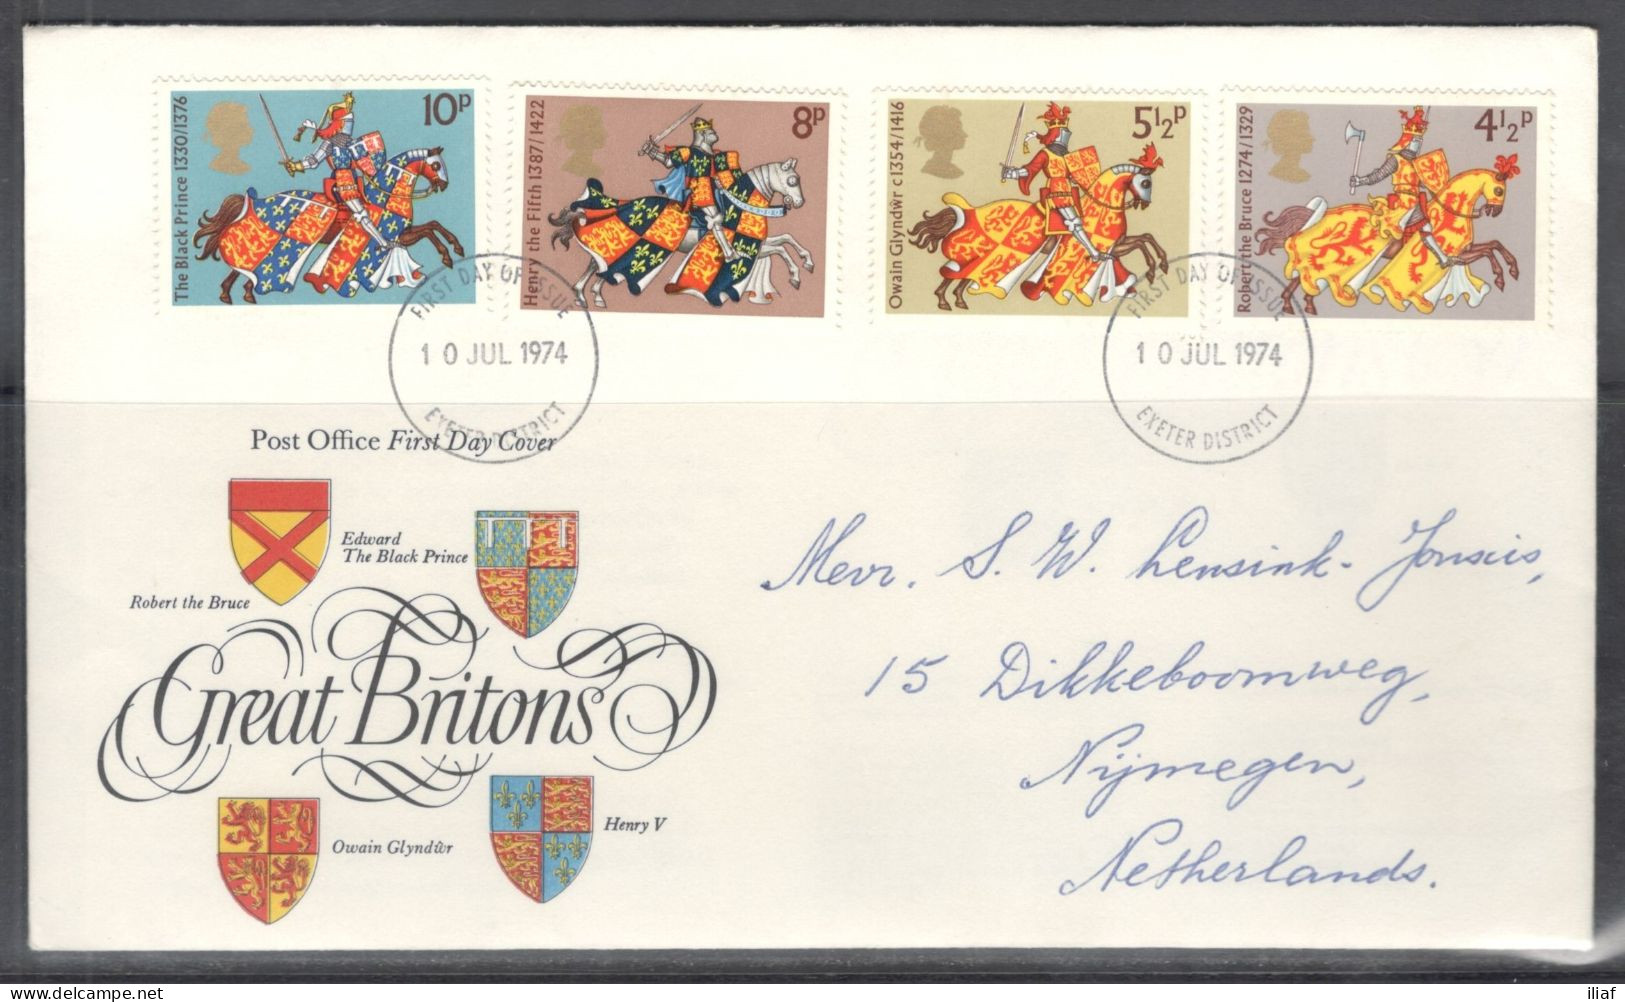 United Kingdom Of Great Britain.  FDC Sc. 724-727.  Medieval Warriors.   FDC Cancellation On FDC Envelope - 1971-1980 Em. Décimales